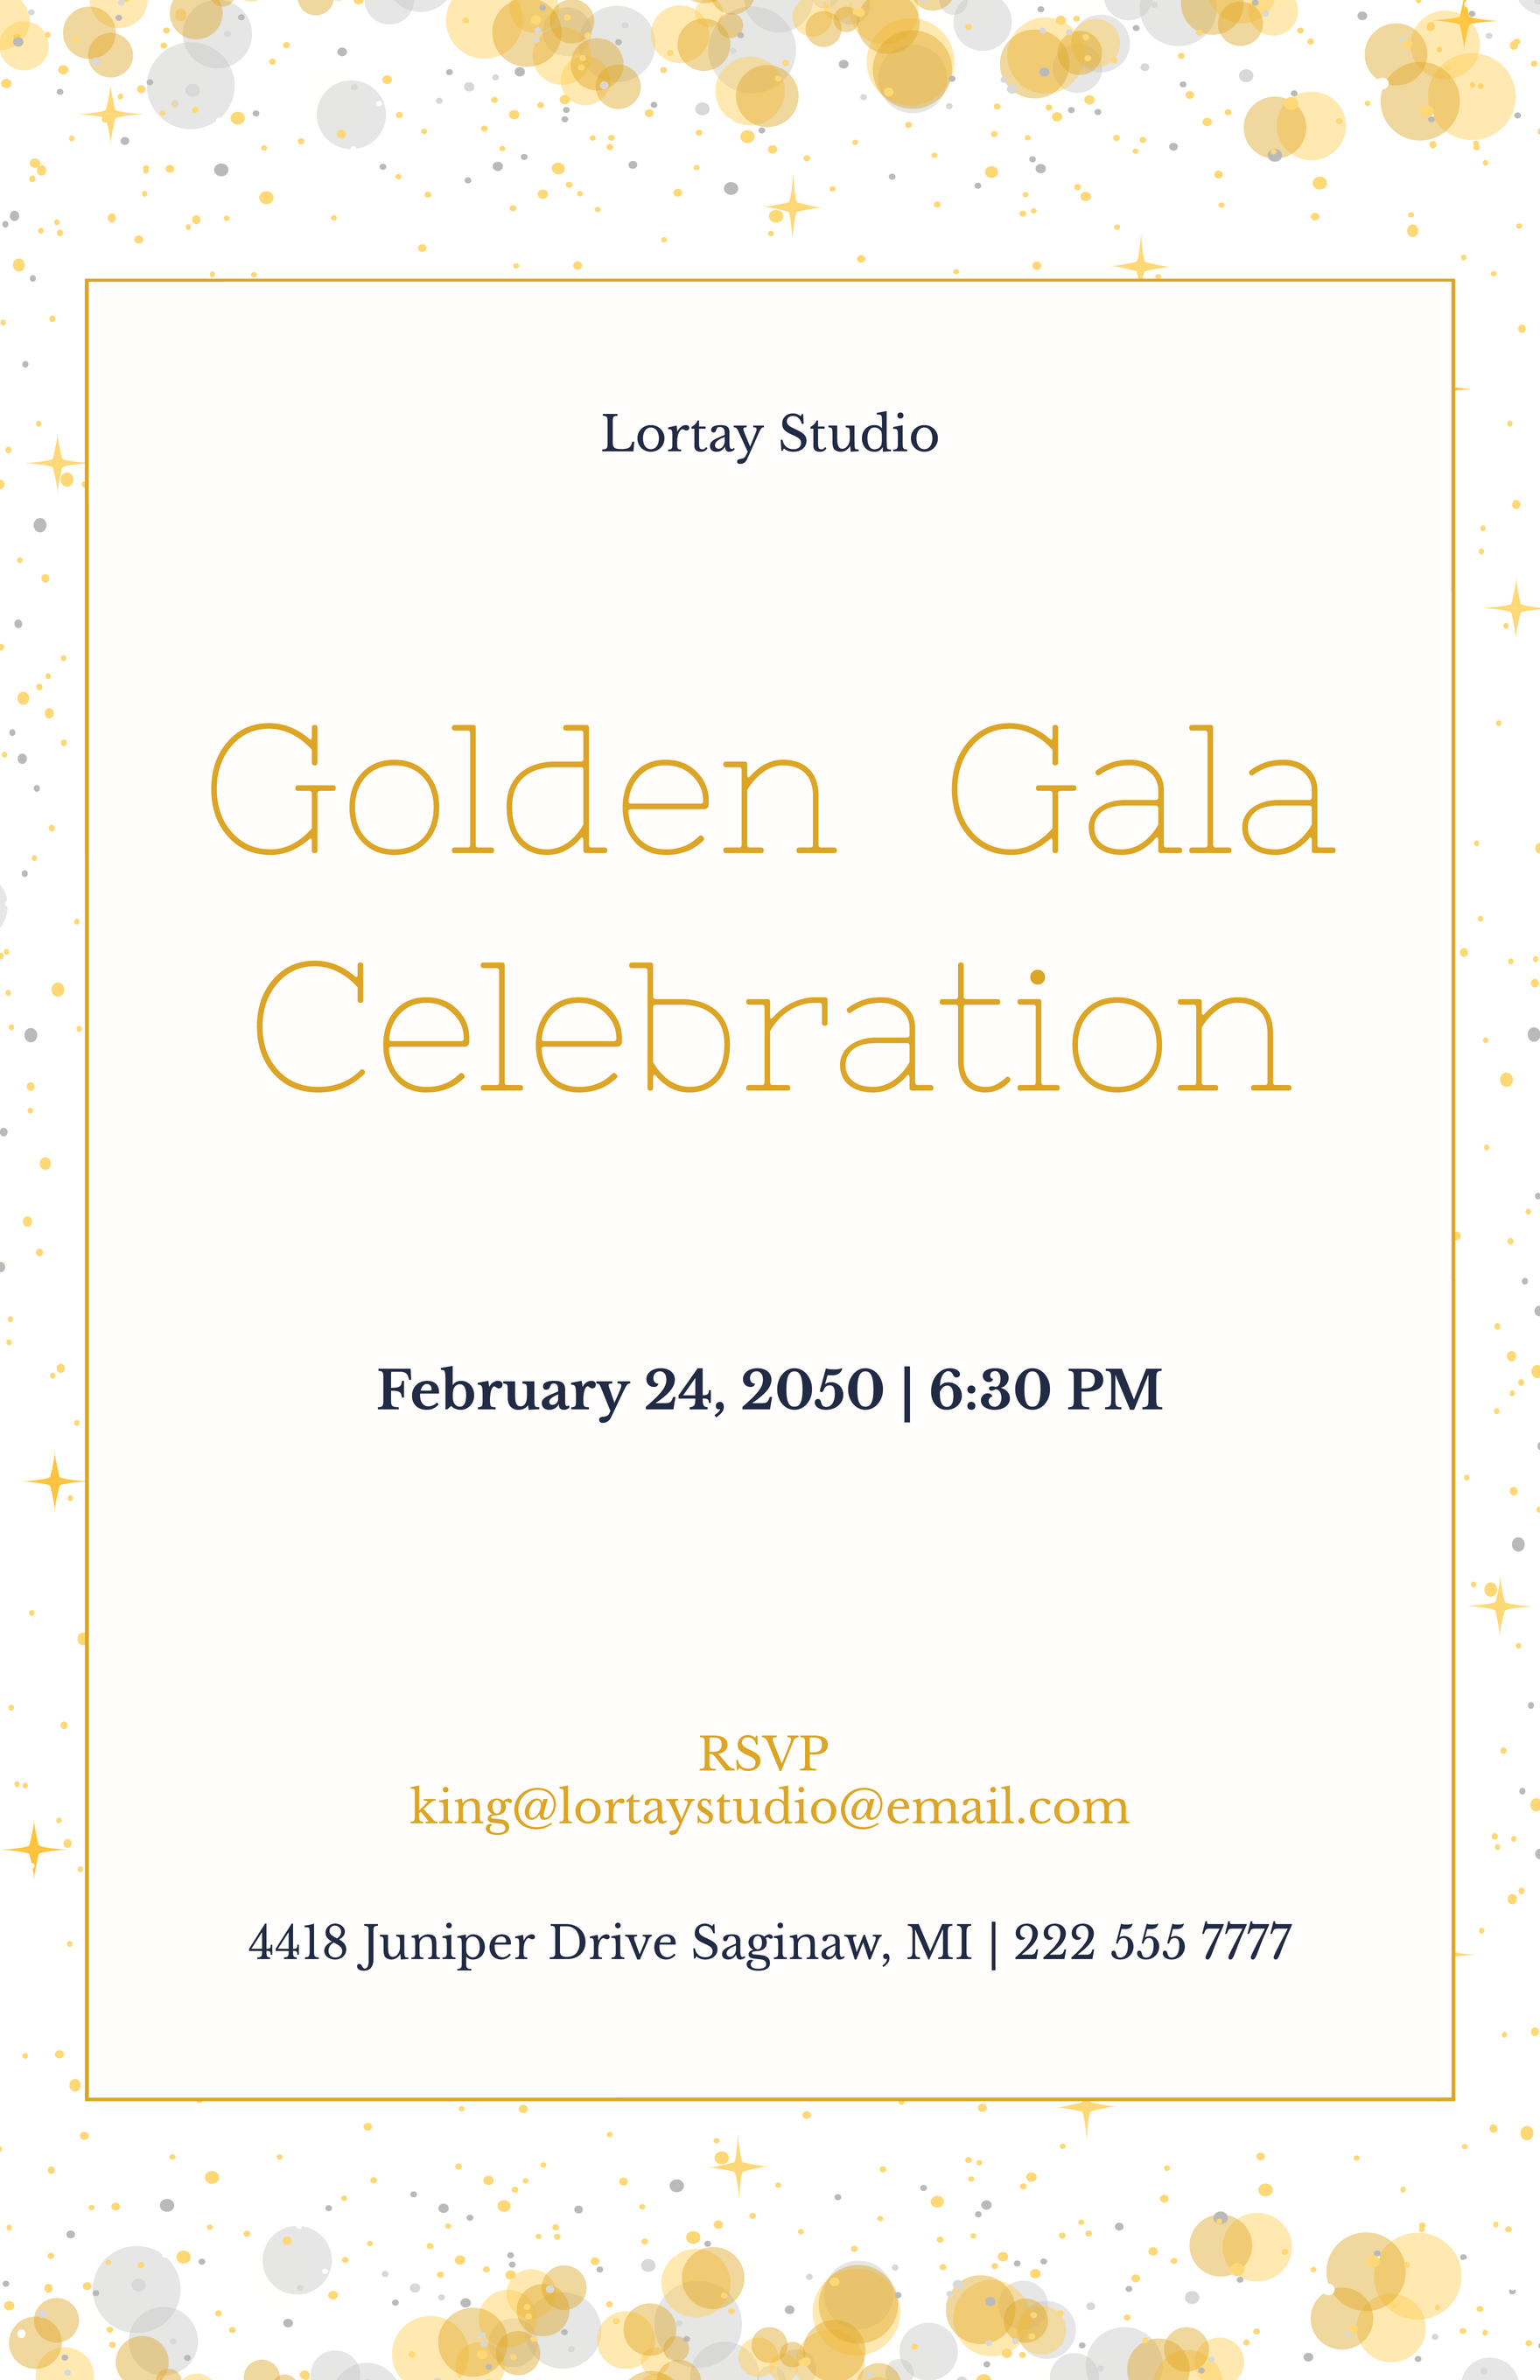 Free Golden Gala Poster Template in Word, Google Docs, Illustrator, PSD, Apple Pages, Publisher